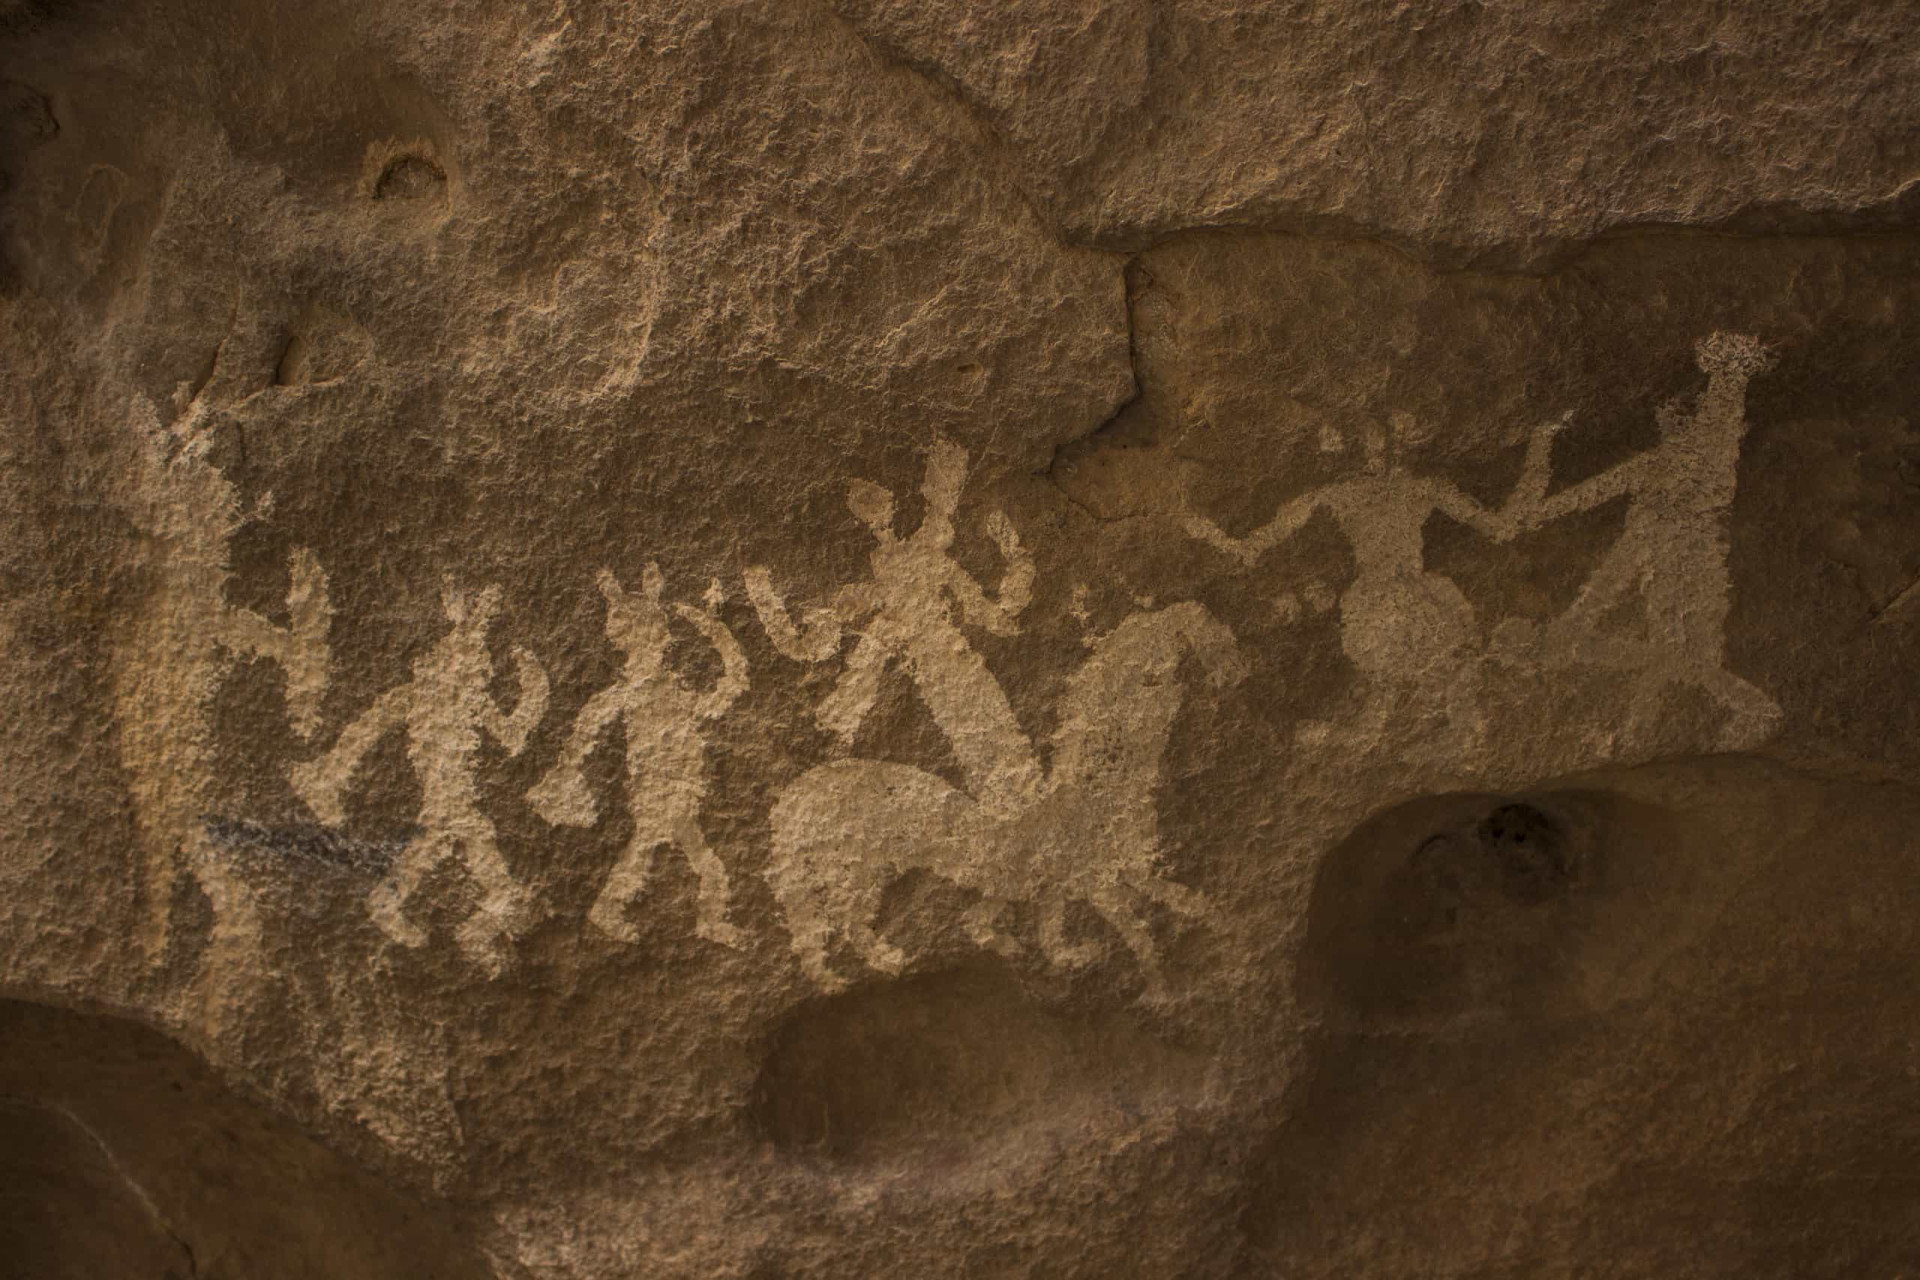 <p>Spiritually significant to Native Americans, the pictographs (rock paintings) that characterize the Hueco Tanks area of the Chihuahuan Desert, are thousands of years old.</p><p>You may also like:<a href="https://www.starsinsider.com/n/318917?utm_source=msn.com&utm_medium=display&utm_campaign=referral_description&utm_content=198095v22en-en"> Celebrities who have sued their own parents</a></p>